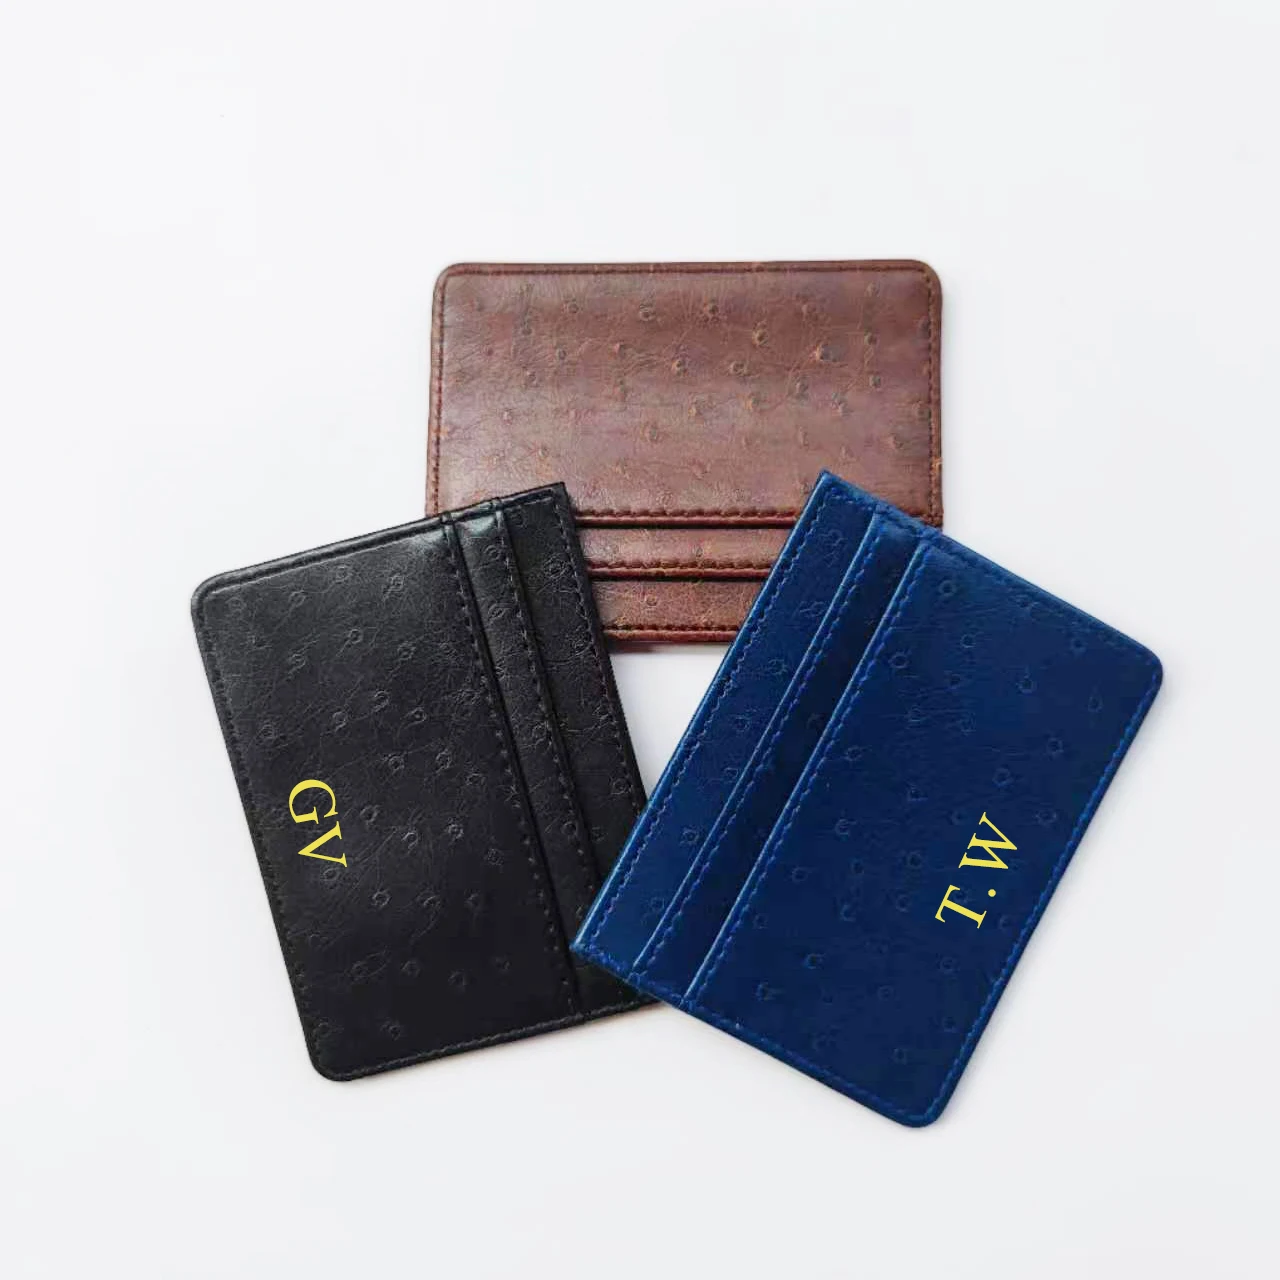 

Free Custom Initials Vegan Pu Leather Card Holder Ostrich Pattern Slim Card Wallet With 5 Card Slots Credit Card Case Gift